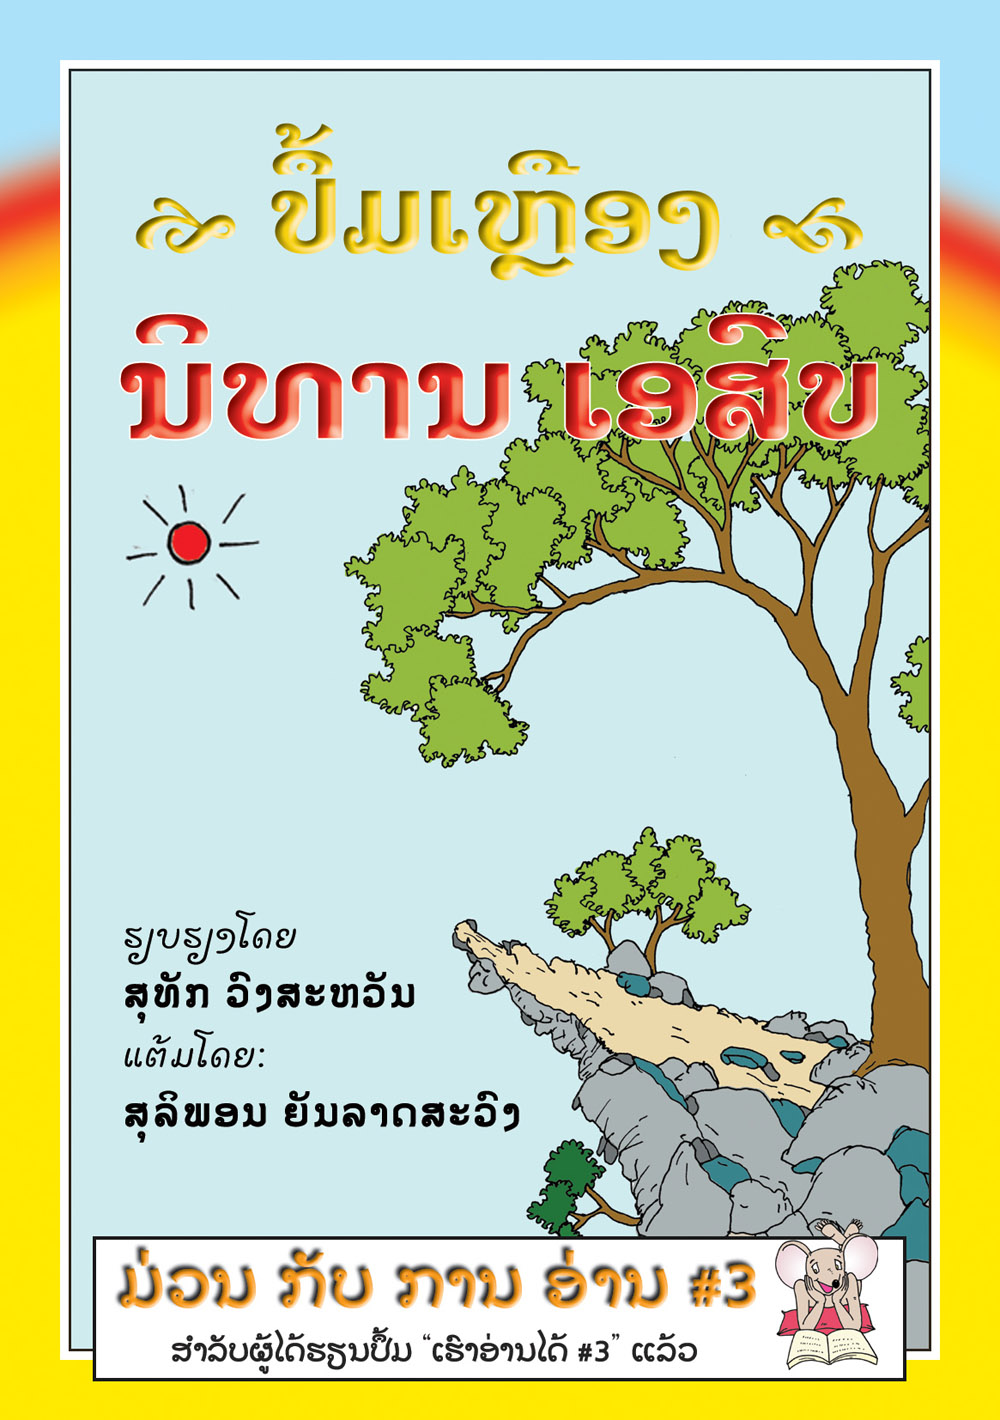 The Yellow Book of Aesop's Fables large book cover, published in Lao language